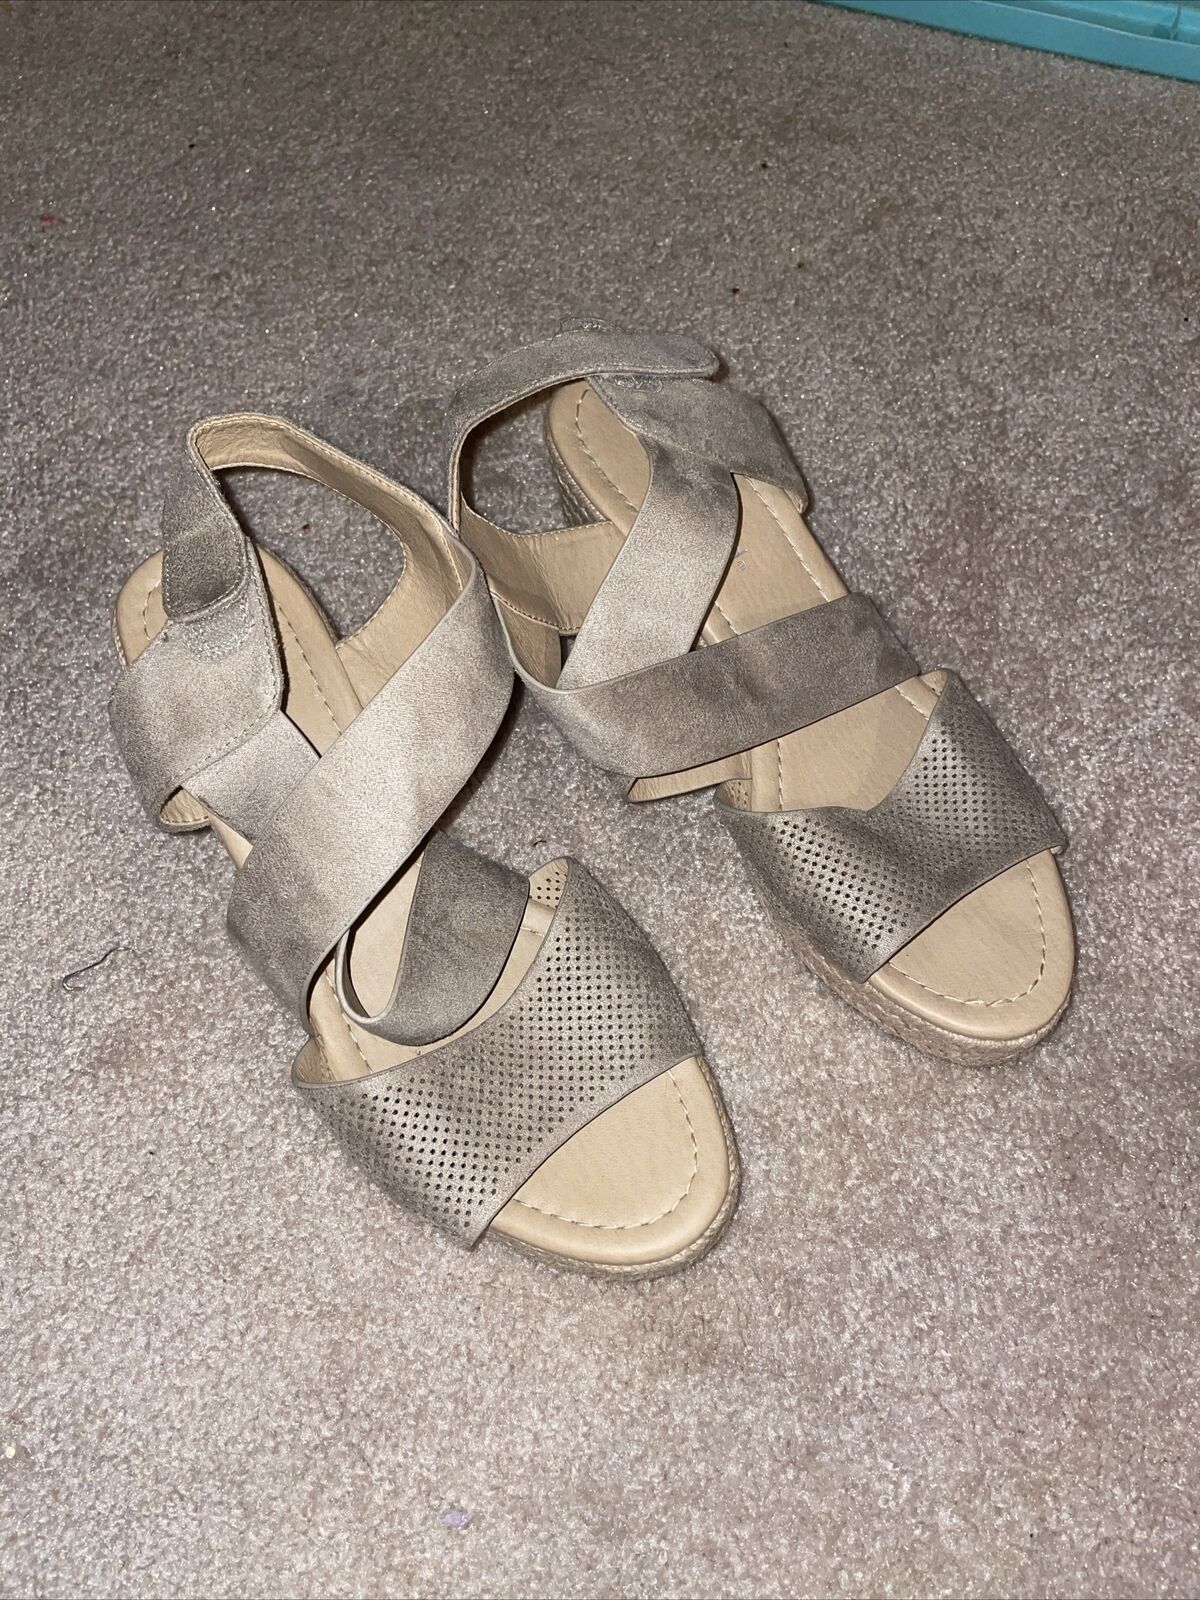 Cityclassified womens wedge sandals size 7